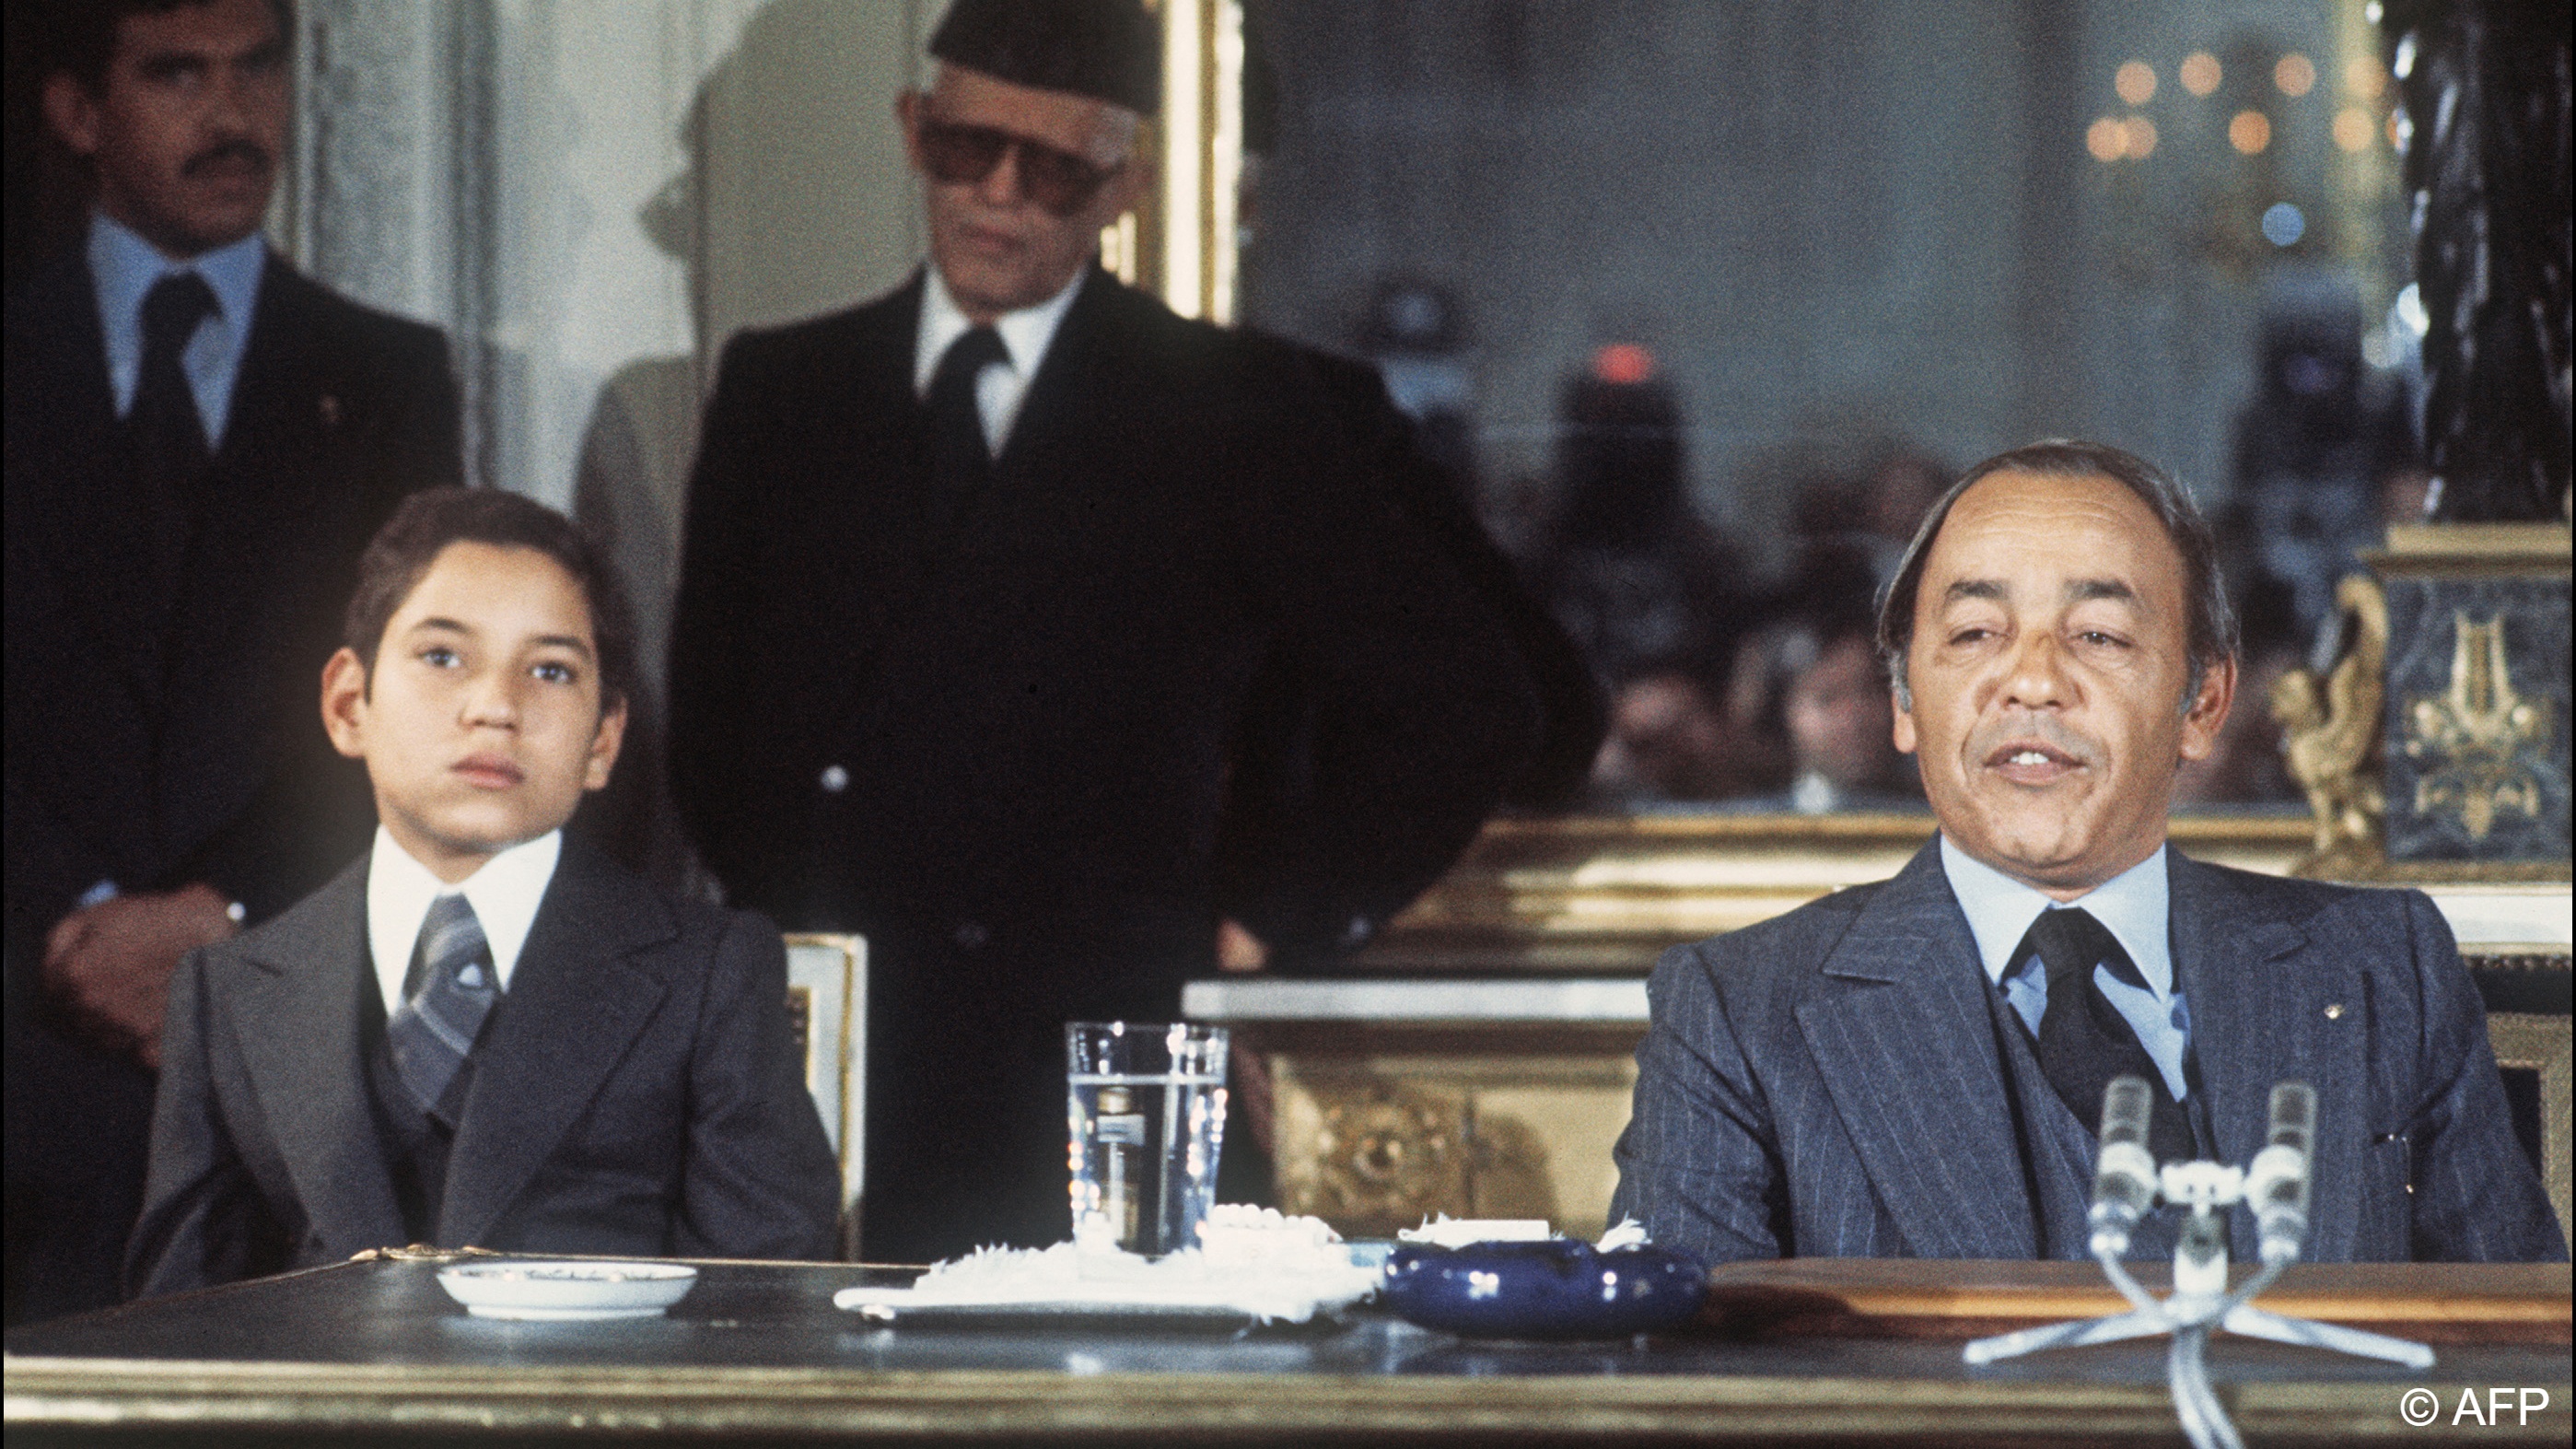 Mohammed VI as a child with his father King Hassan II (image: AFP/File)